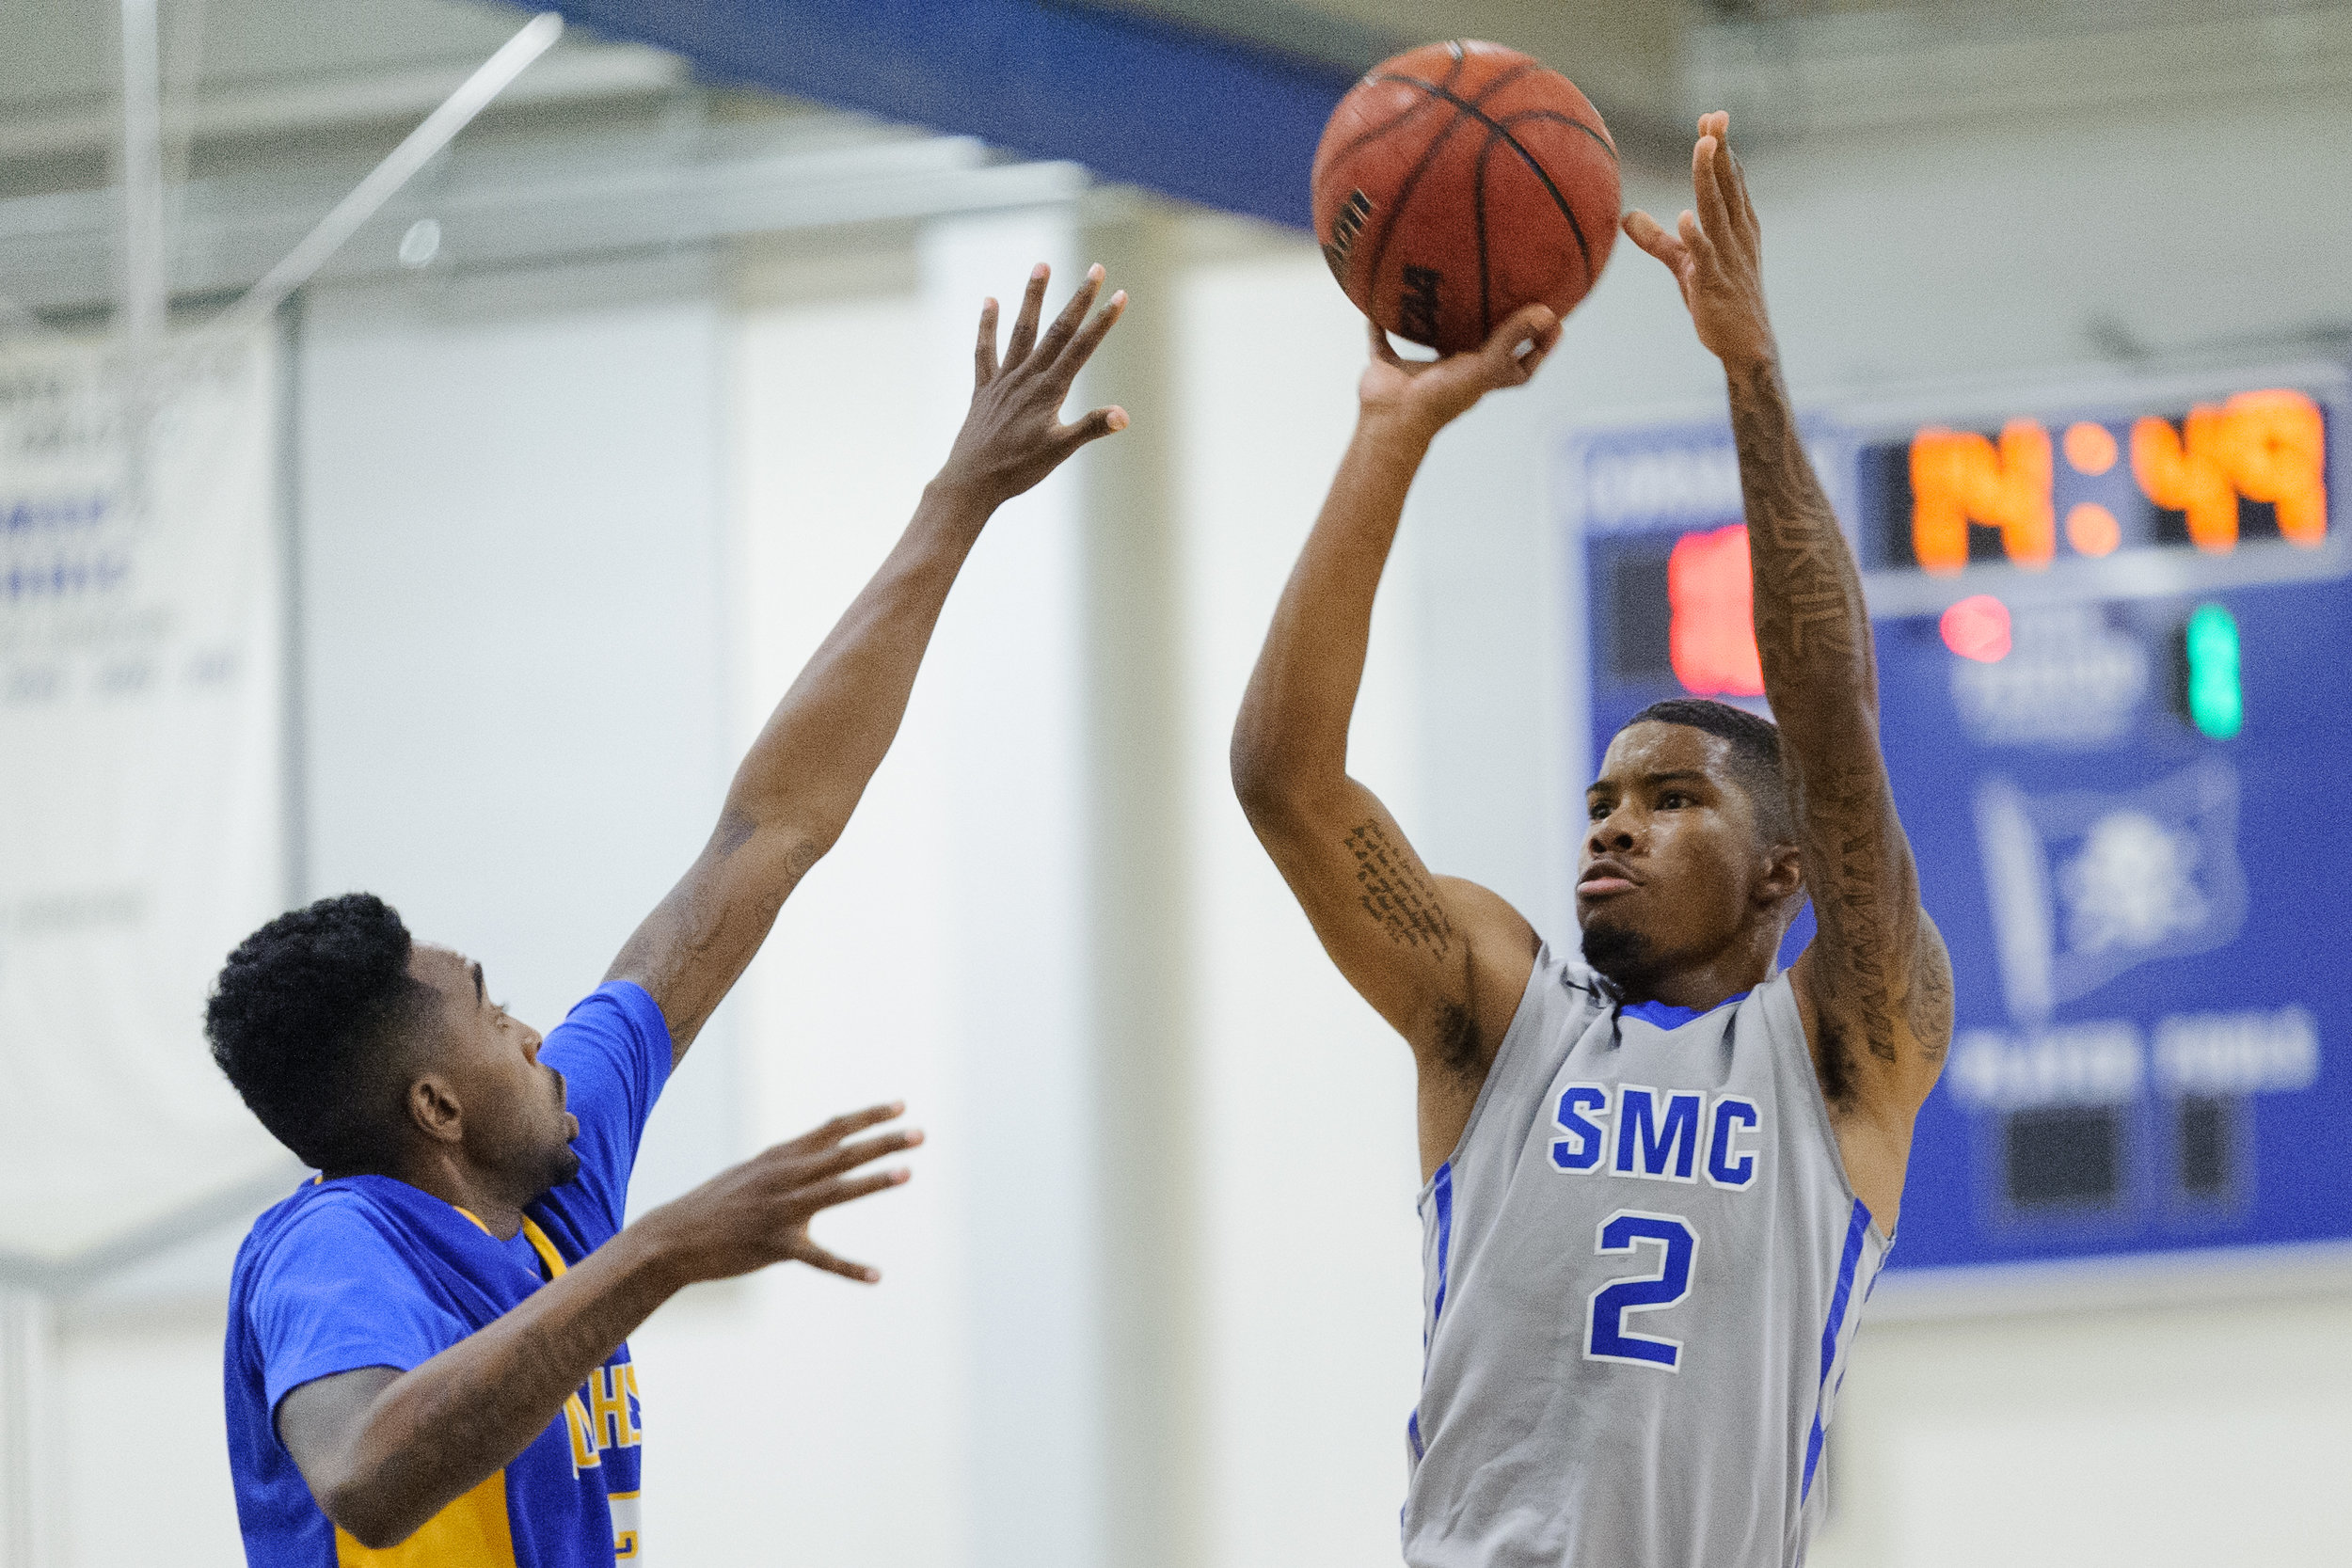  Guard Joe Robinson (2,Right) of the Santa Monica College takes a shot attempt while being contested by guard D’Lano Beckles (3,Left) of Southwest College. The Santa Monica College Corsairs win their first home game of the season 84-53 against the So